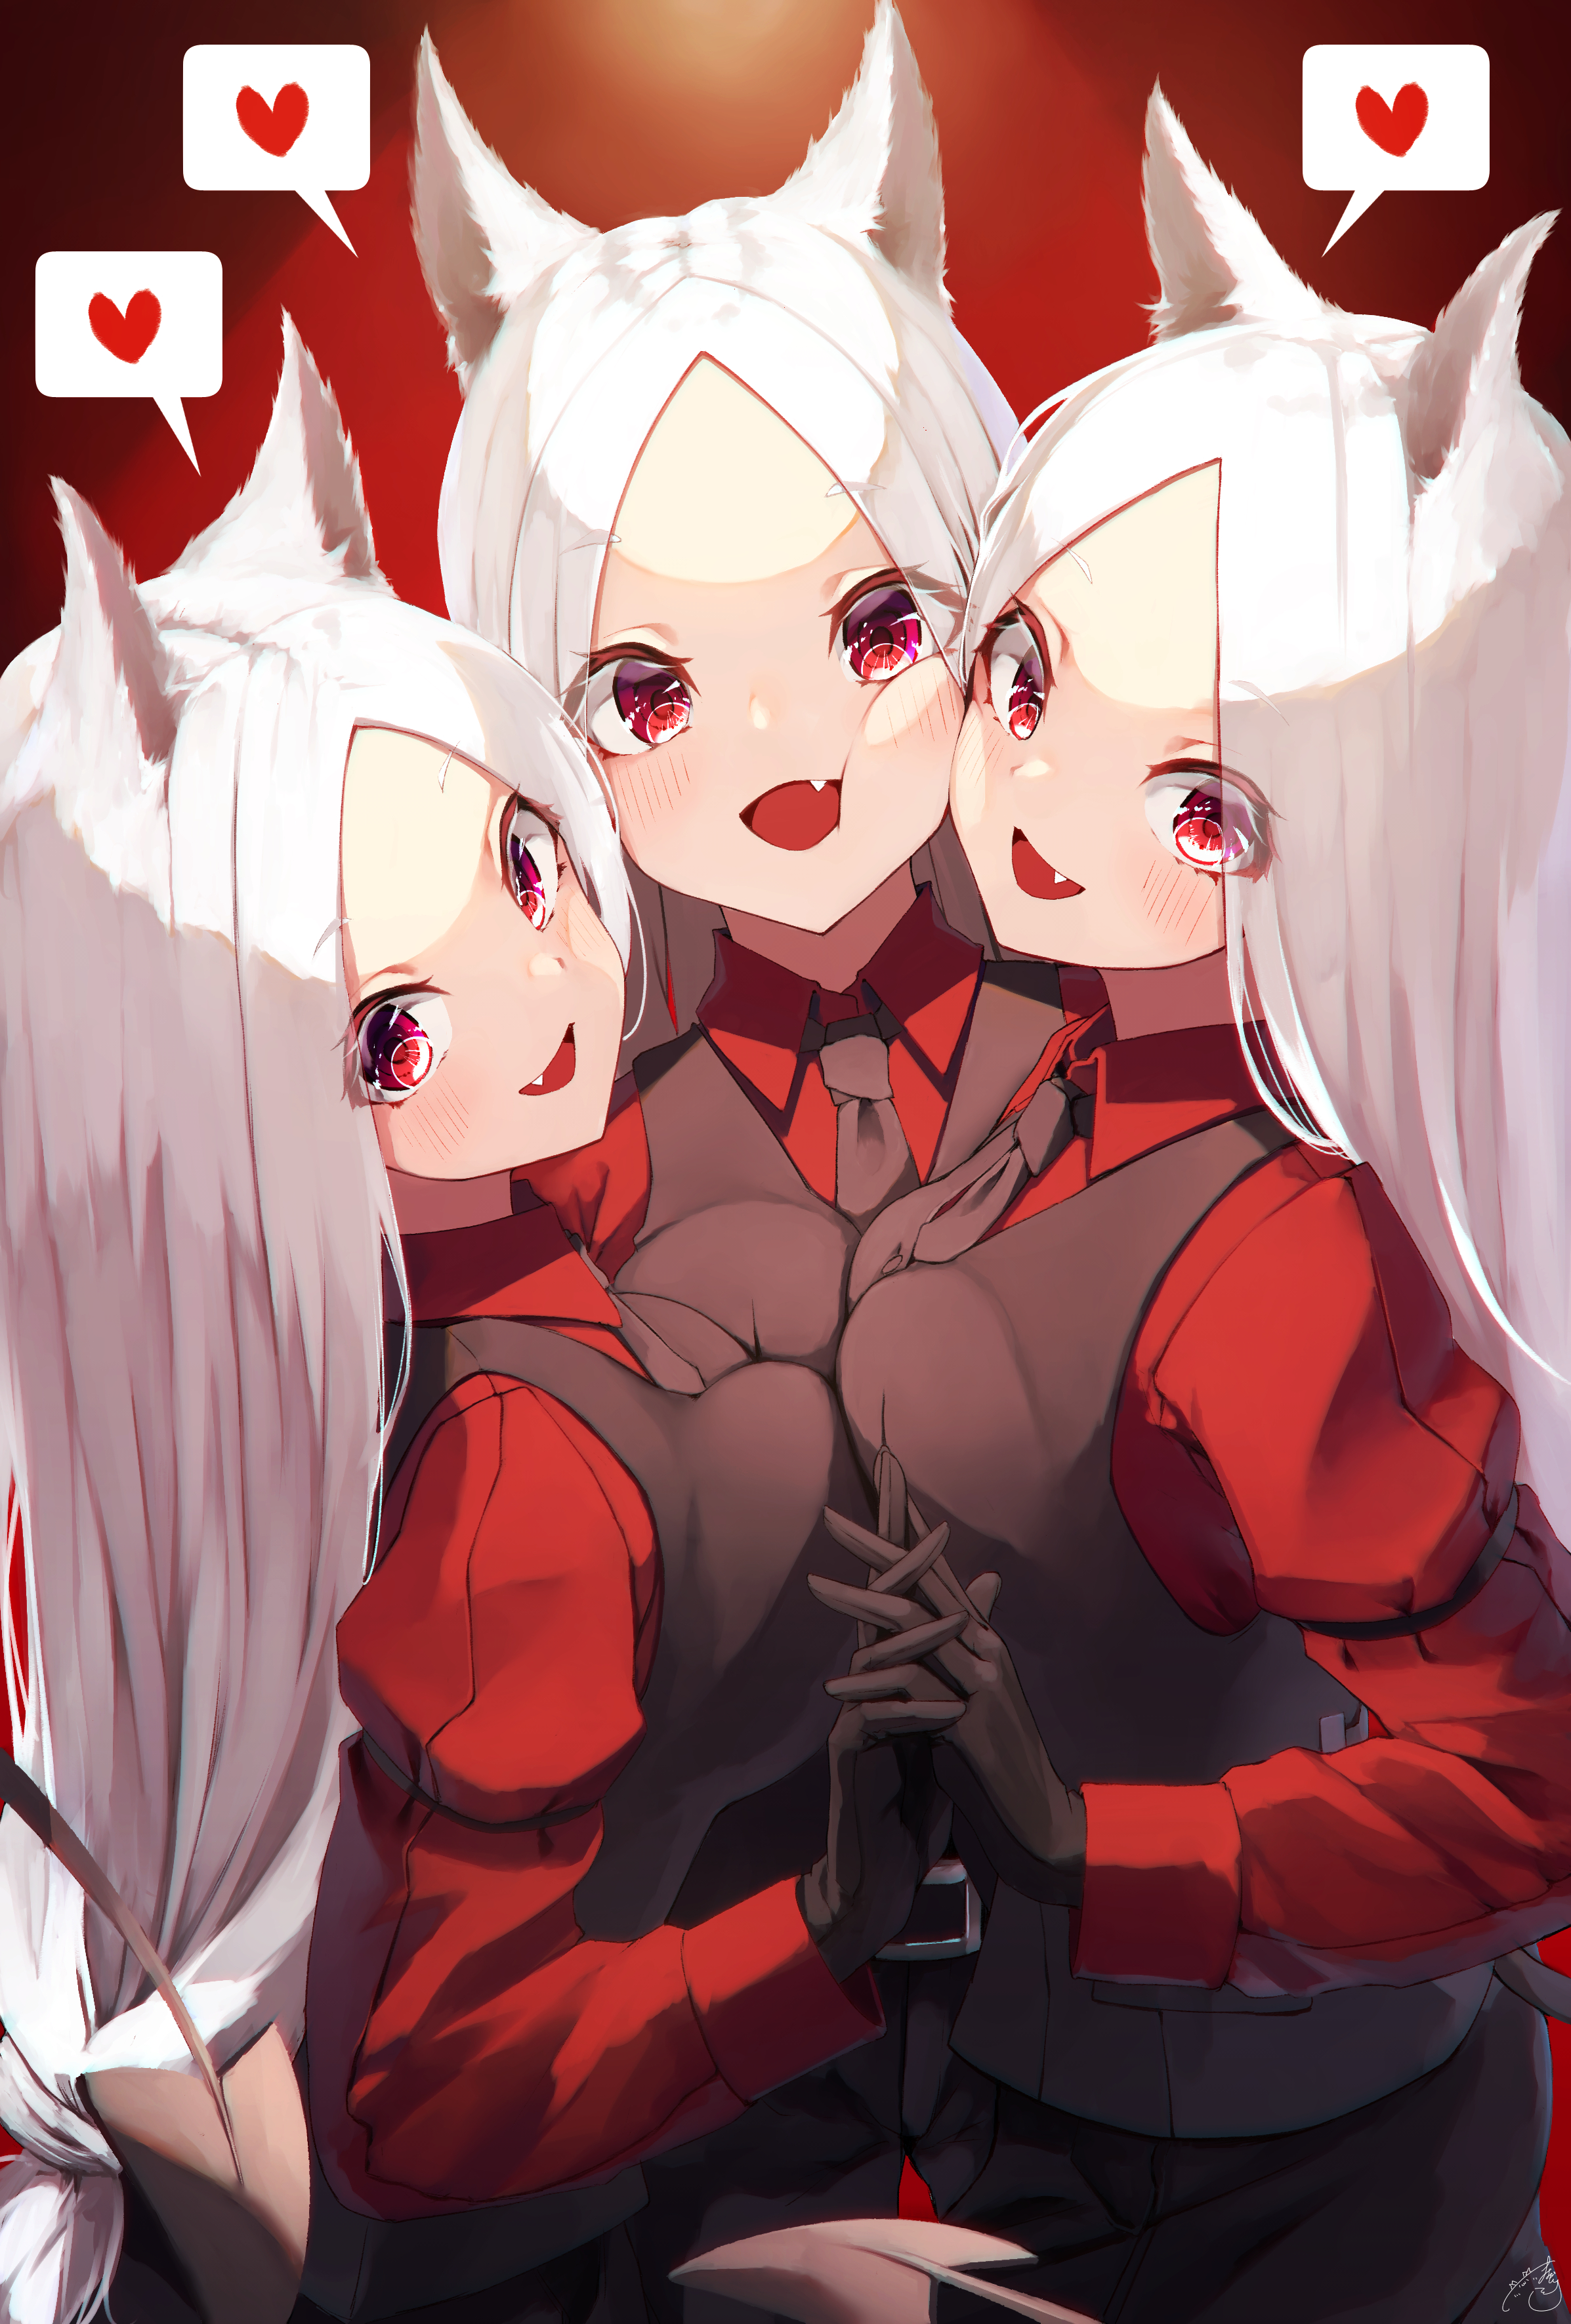 Anime 2394x3541 anime anime girls digital art artwork 2D portrait display white hair red eyes holding hands looking at viewer Helltaker Cerberus (Helltaker) Mayogii animal ears tail suits boobs on boobs